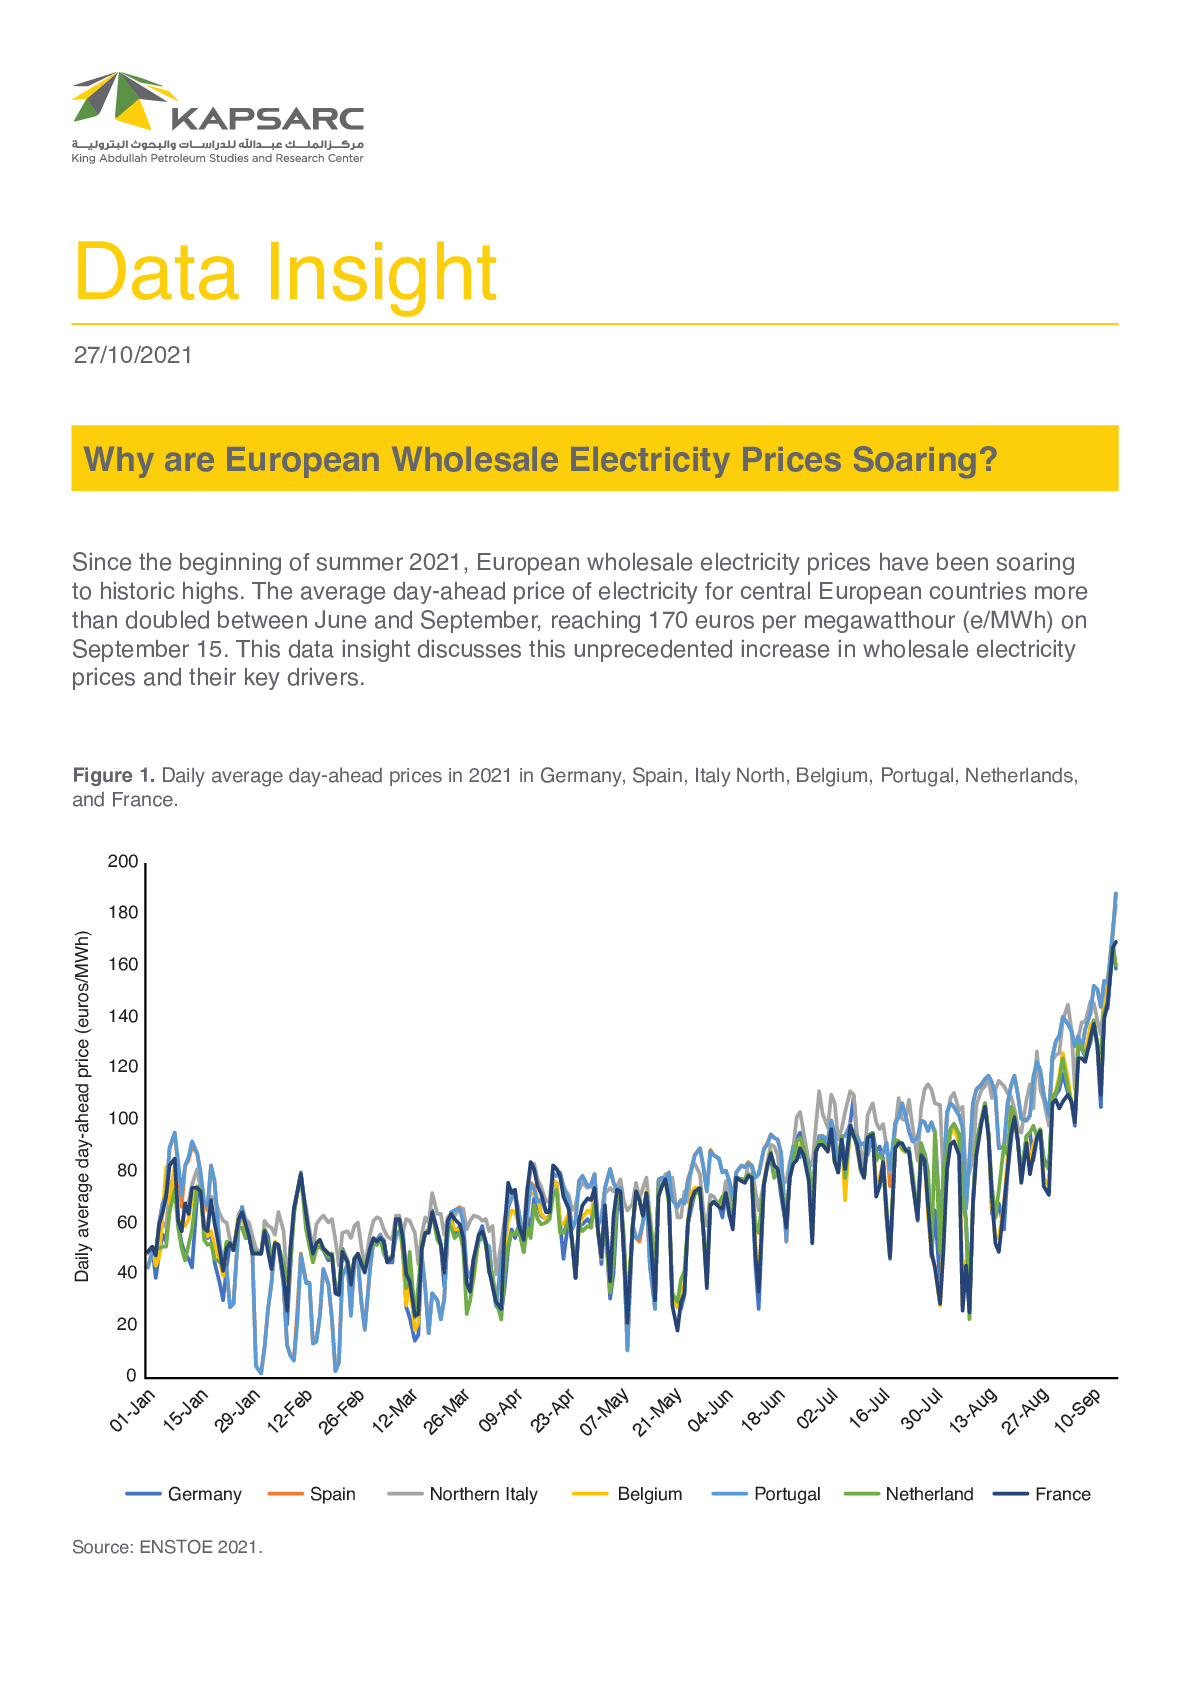 Why are European Wholesale Electricity Prices Soaring?